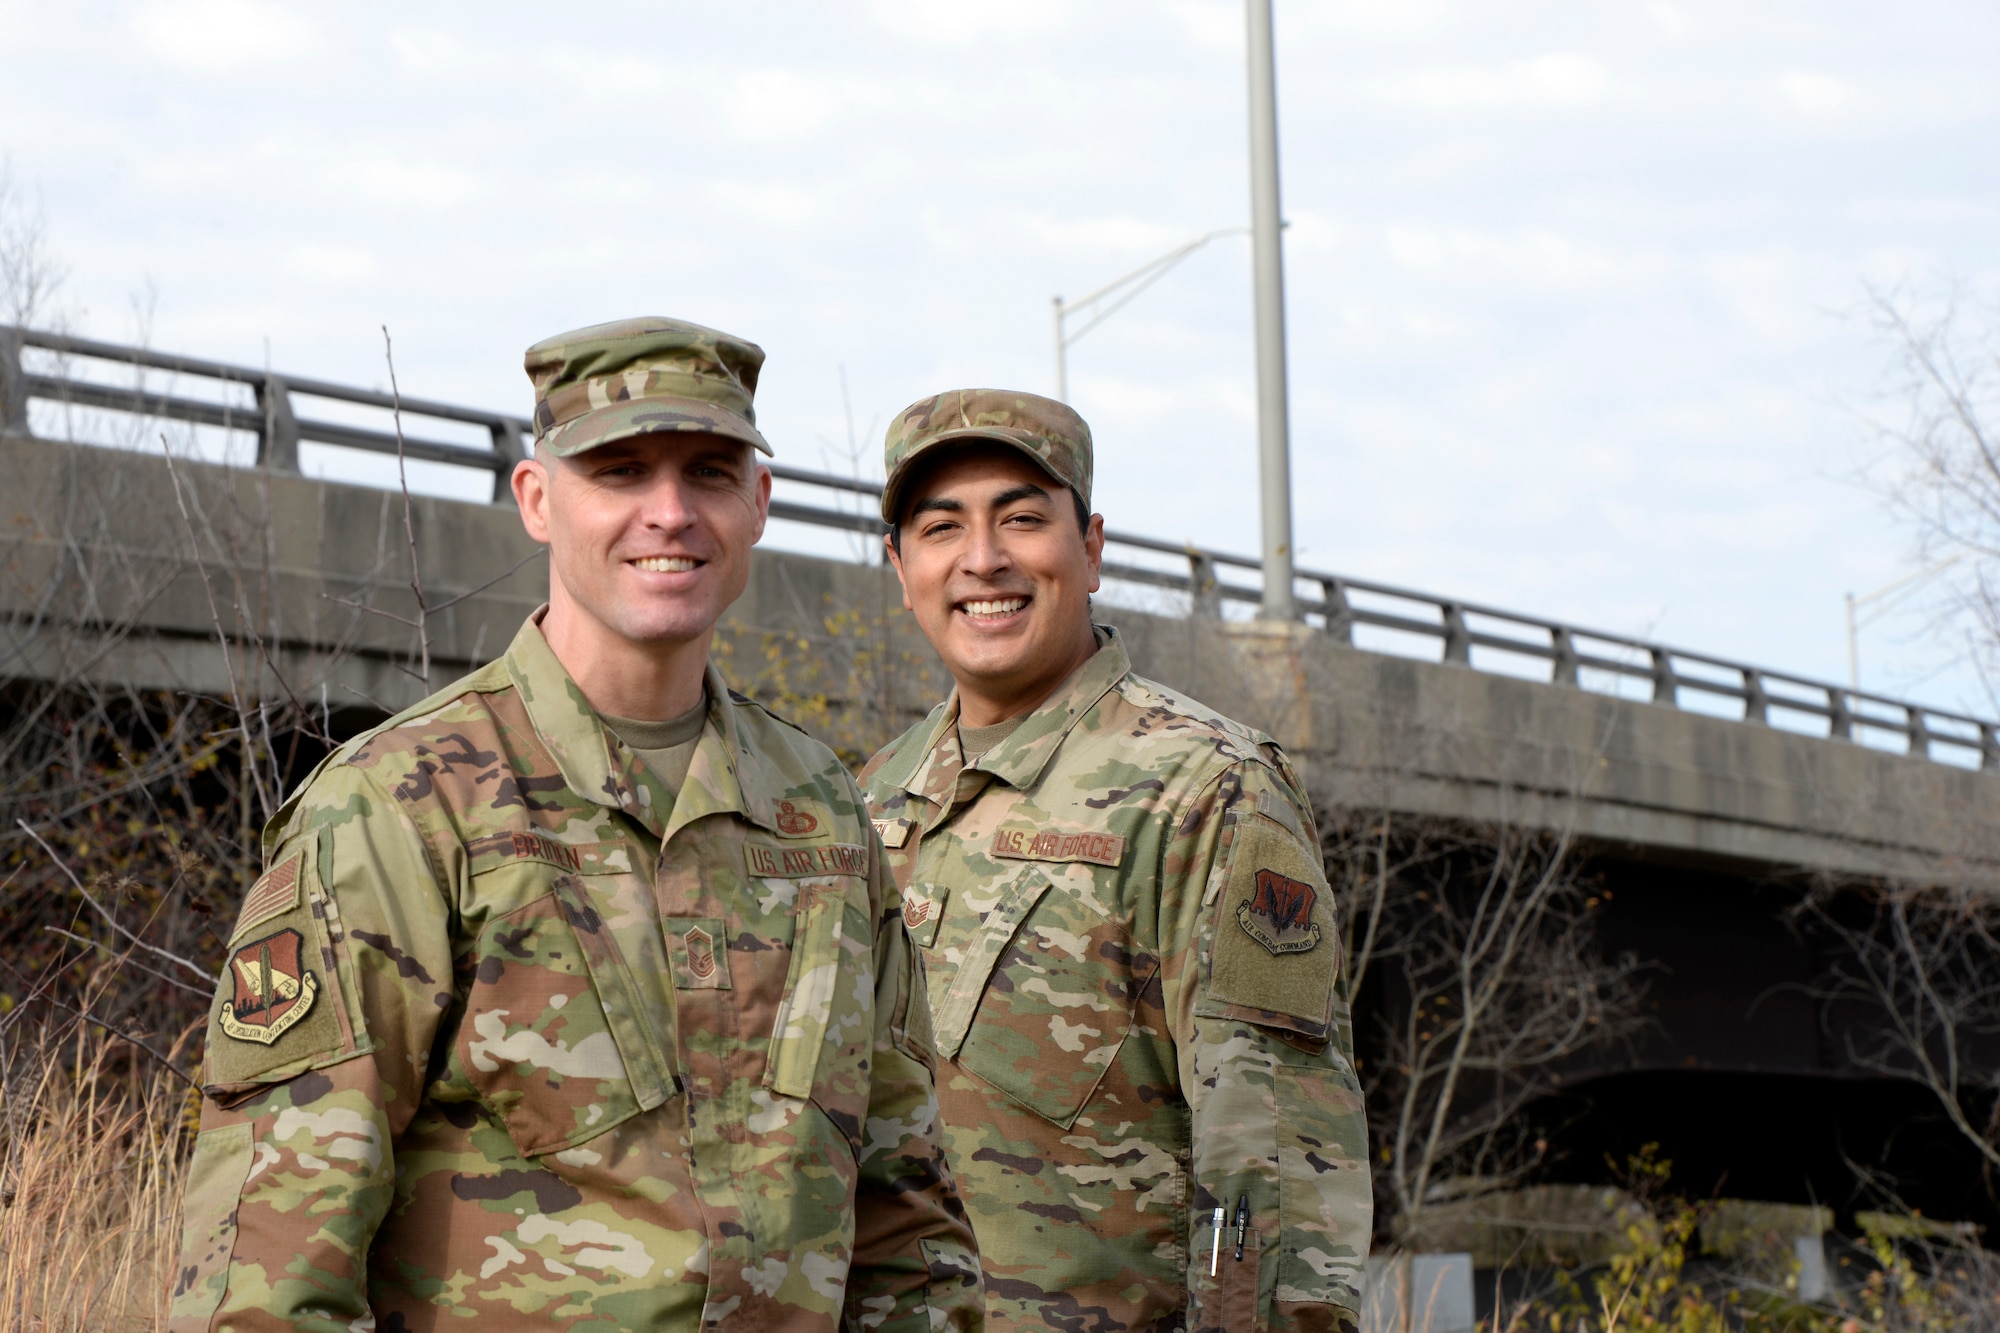 U.S. Air Force Senior Master Sgt. David Briden, left, Air Force Installation Contracting Center expeditionary operations manager, and Tech. Sgt. Anthony Staton, National Air and Space Intelligence Center, stand on the South Maple Avenue bridge in Fairborn, Ohio, on Nov. 20, 2020. Two days earlier, the Airmen assigned to Wright-Patterson Air Force Base stopped to aid a teen who was hanging over the side of the bridge and appeared to be in distress. They stayed with the teen until police and medics arrived. A portion of the photo has been altered for security reasons. (U.S. Air Force photo by Ty Greenlees)